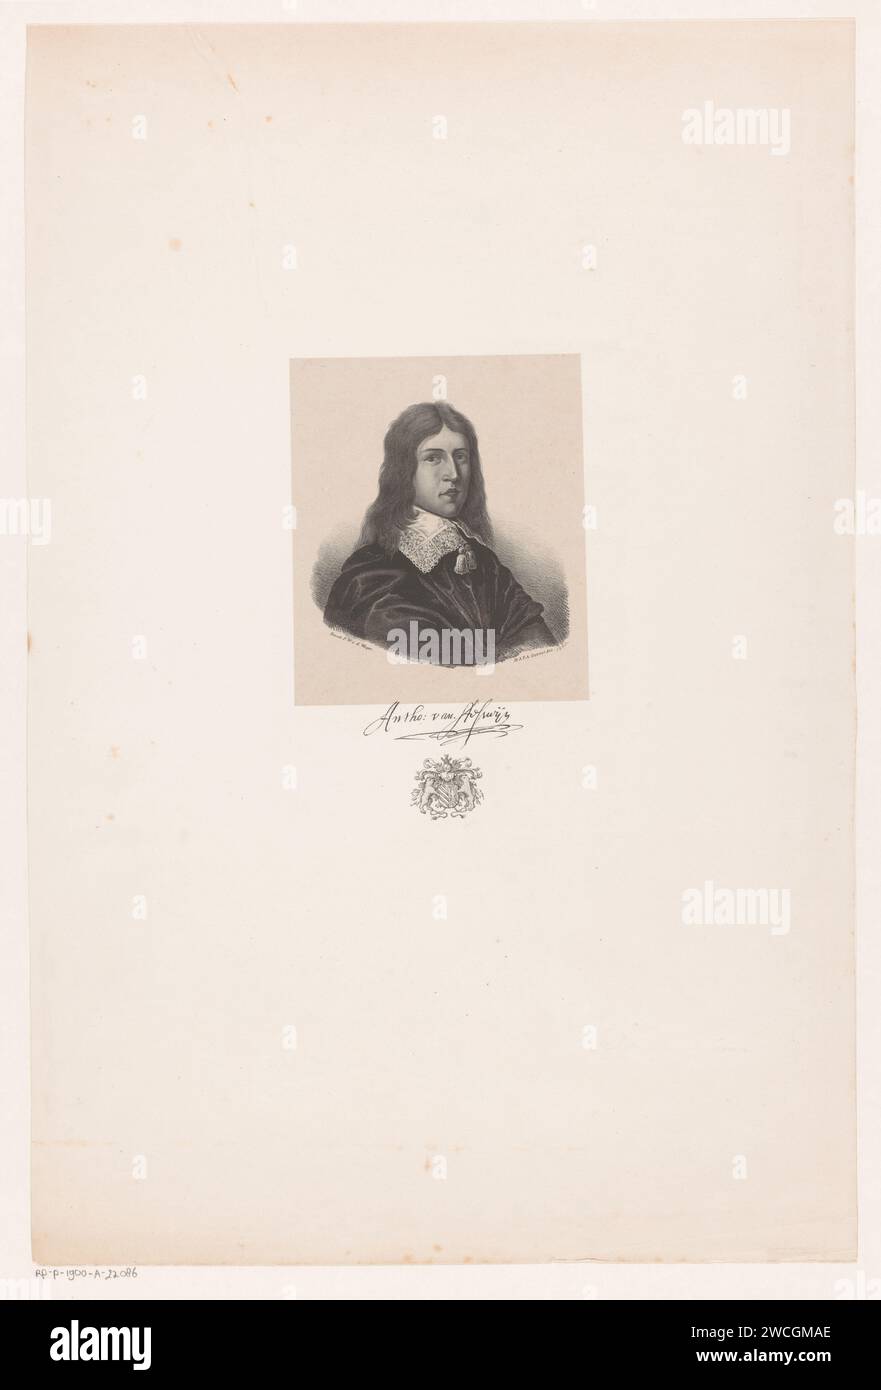 Portret van anthony van aeswijn, Hendrik Anthony Frederik Agathus Gobius, 1852 print The person portrayed wears a cloak and a square lace collar. Under the portrait are signature and a family crest. Utrecht paper.  historical persons (+ (full) bust portrait). armorial bearing, heraldry Stock Photo